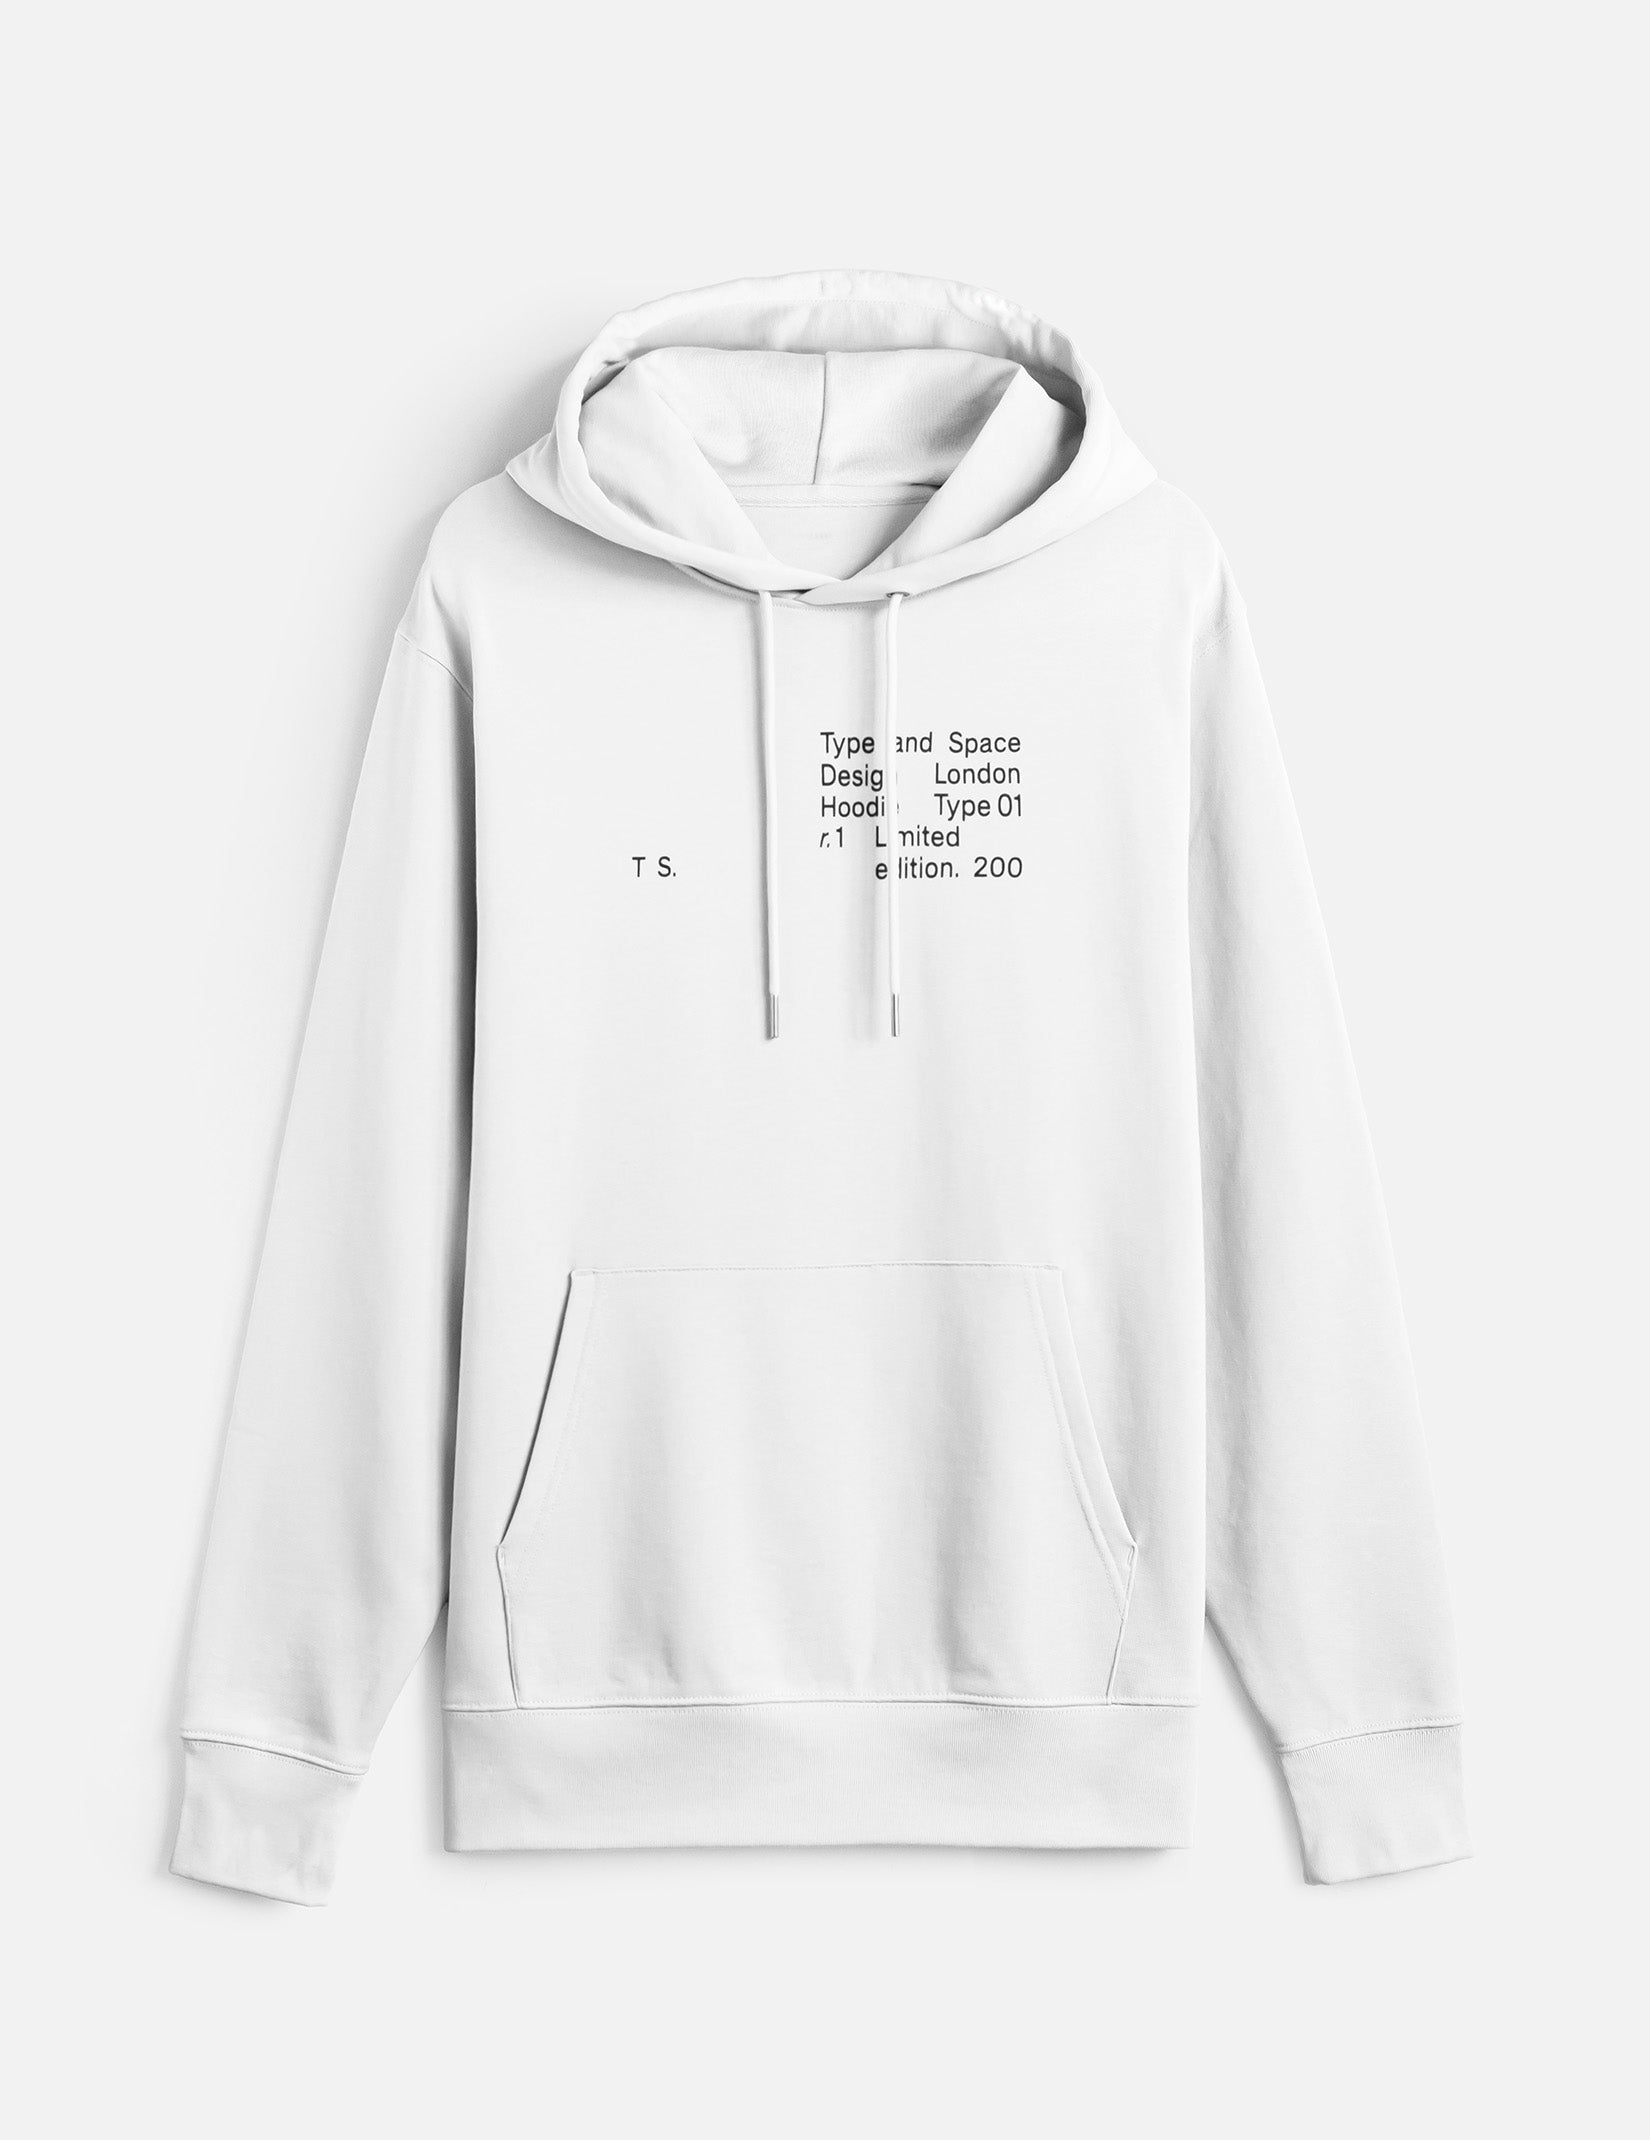 A white hoodie viewed from the front with a black print that says ‘Type and Space Design London Hoodie Type 01 r1 Limited Edition. 200’.